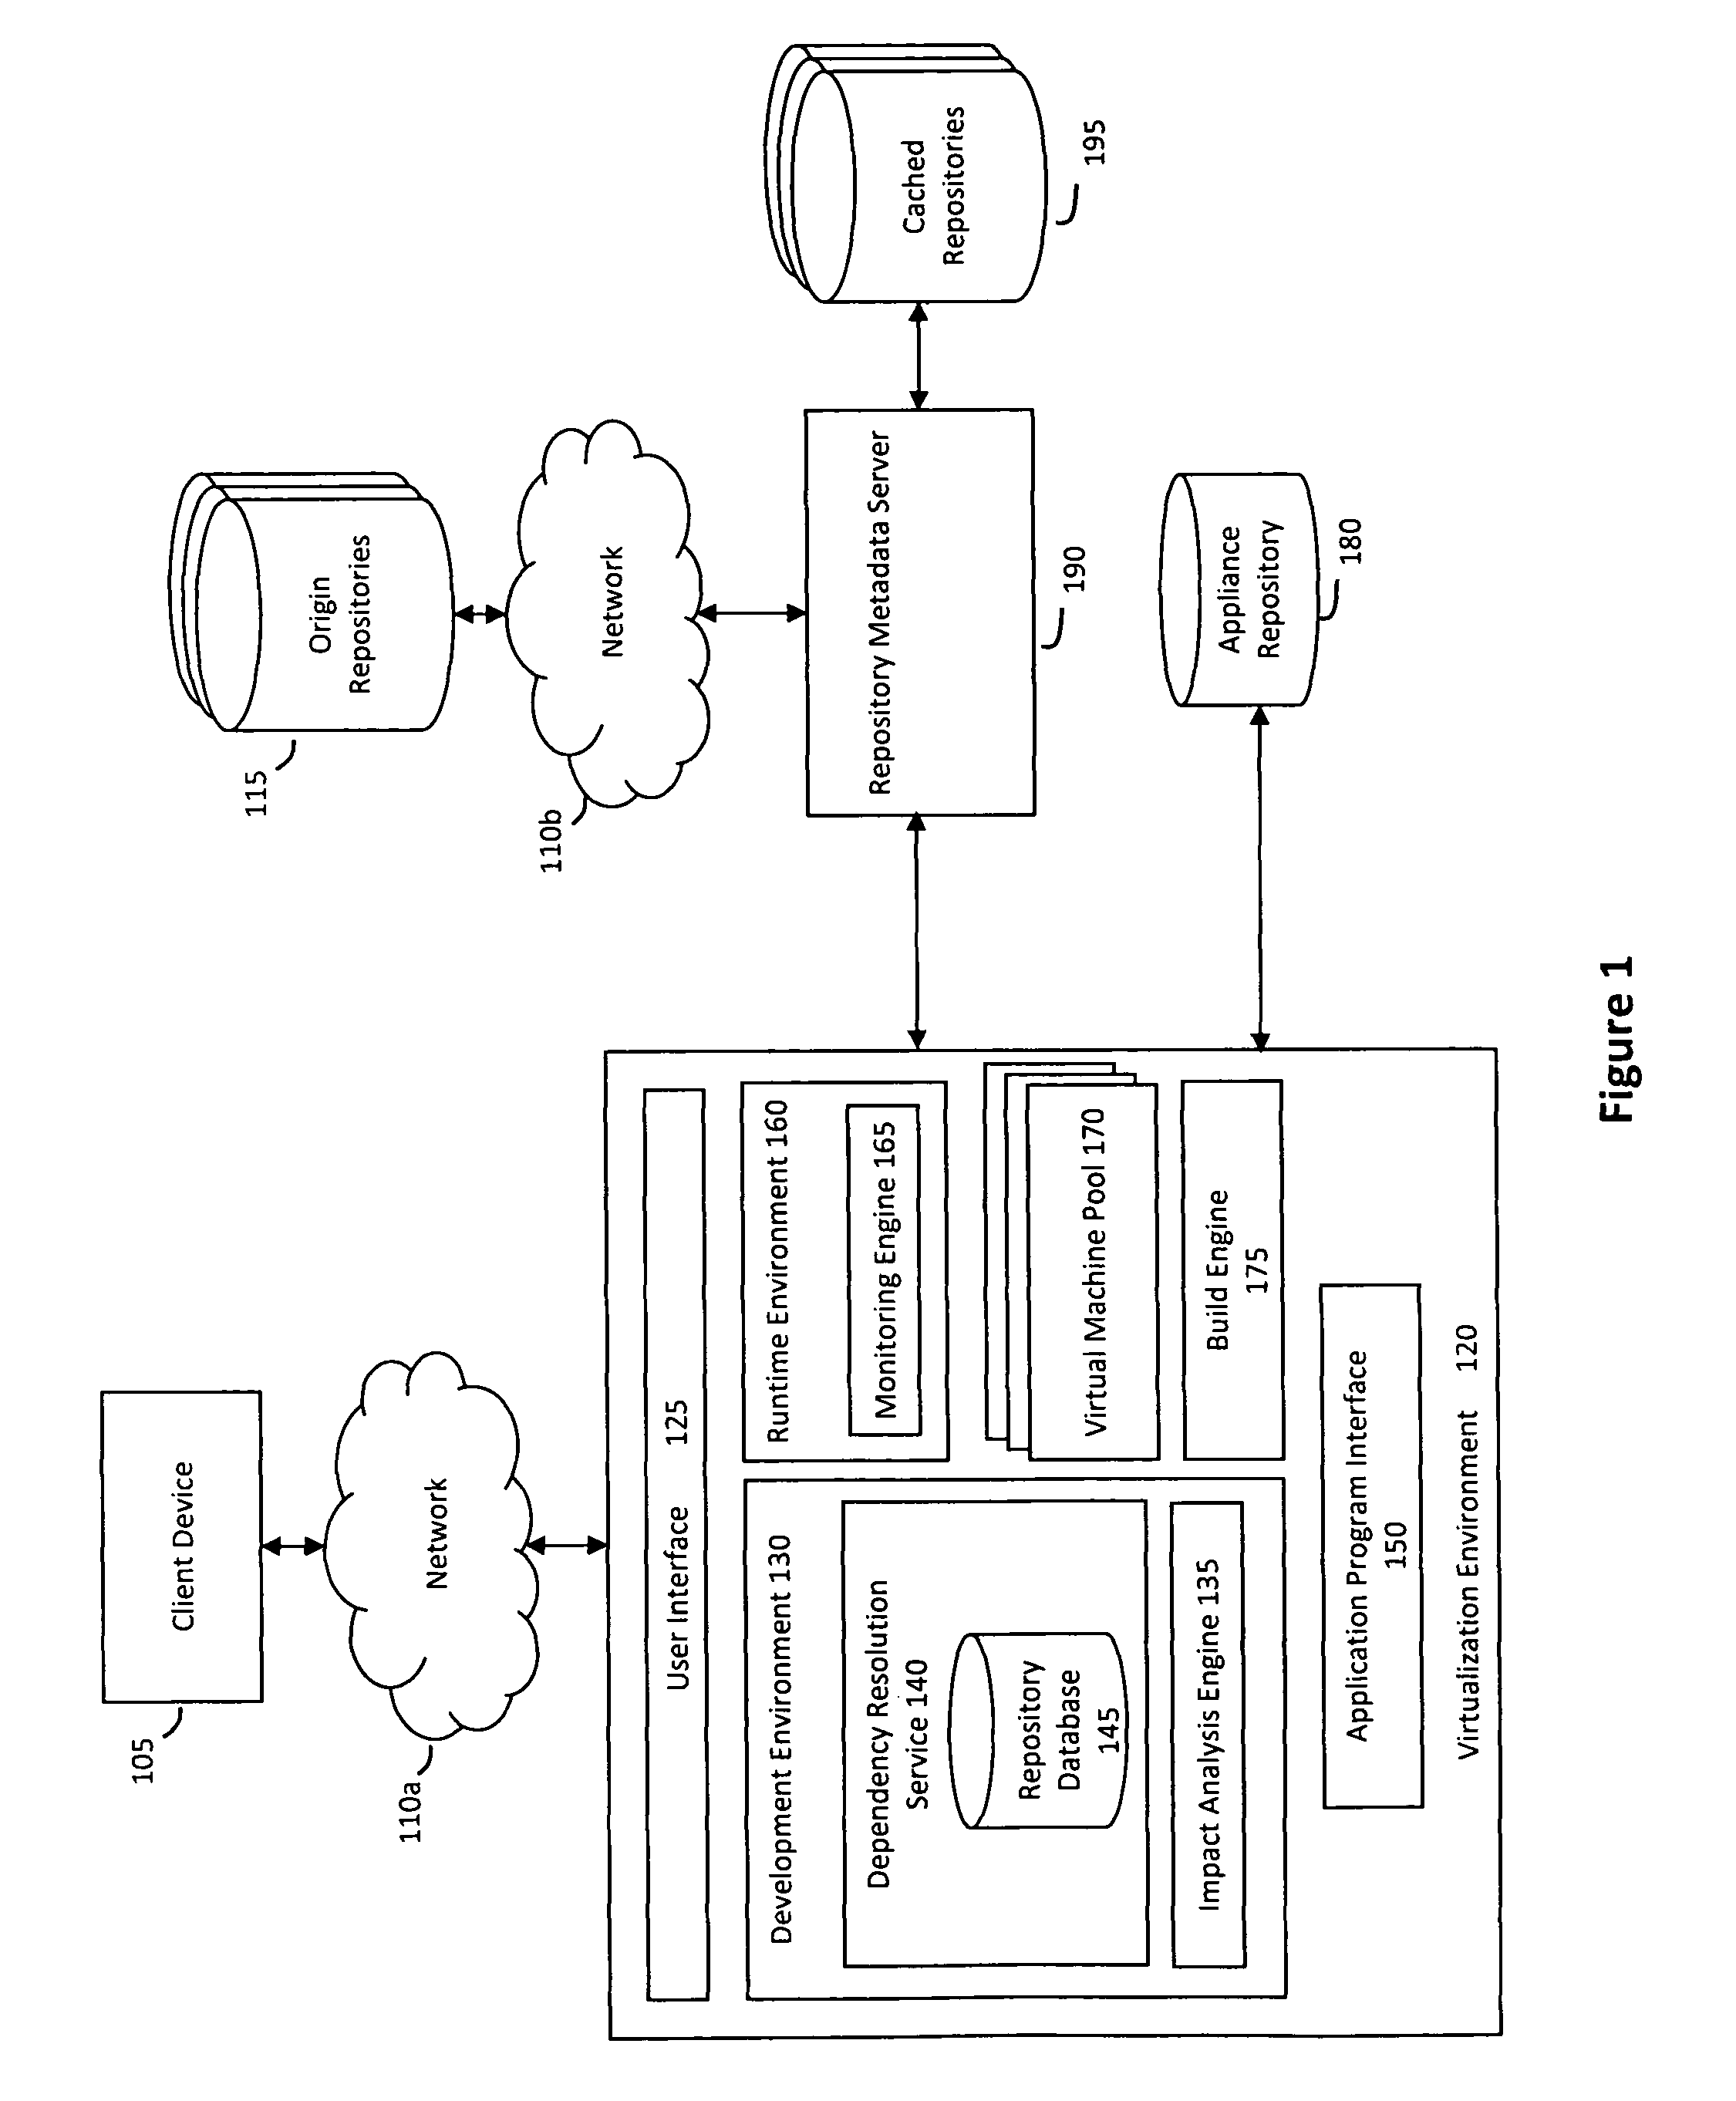 System and method for efficiently building virtual appliances in a hosted environment